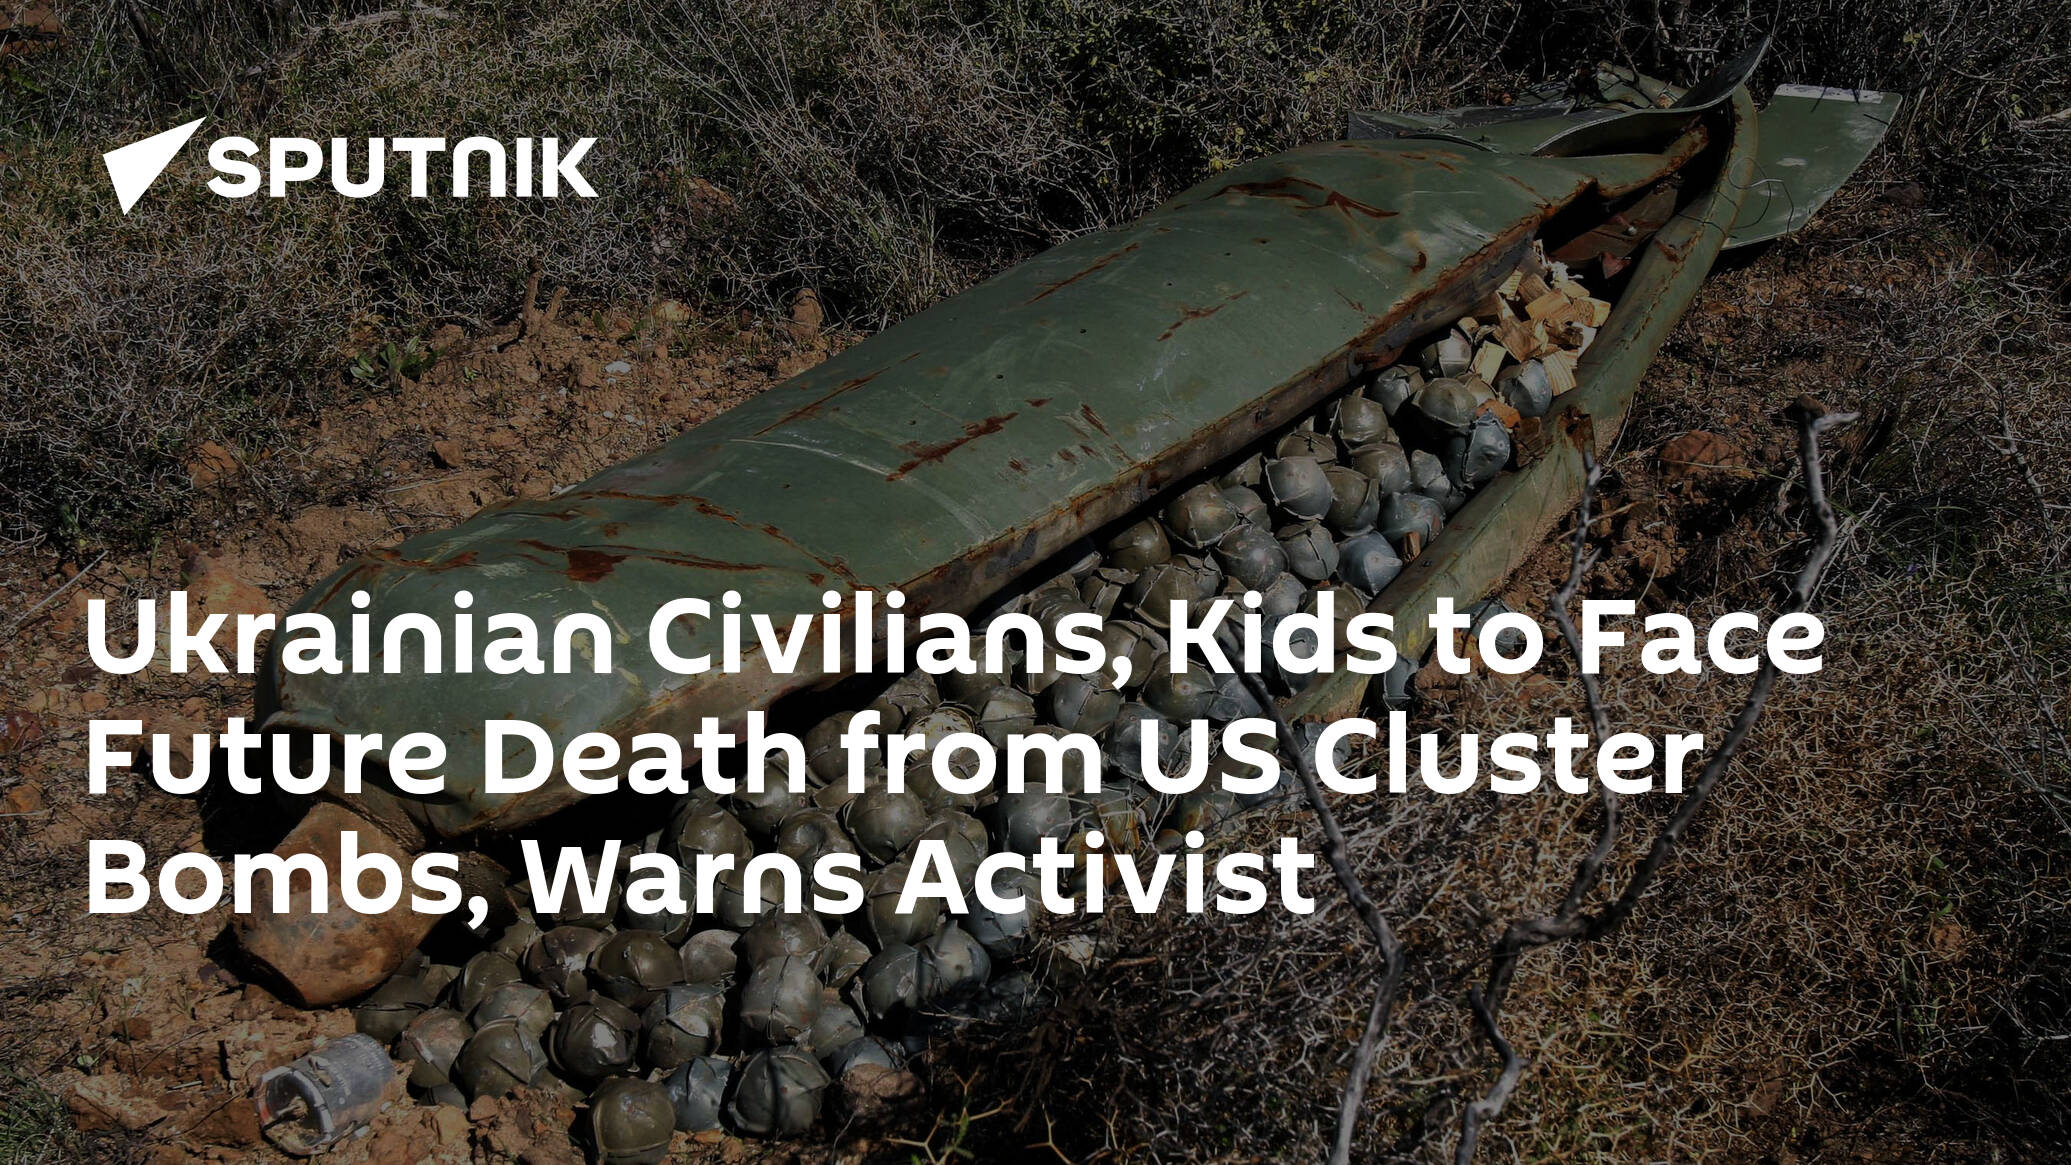 Ukraine Civilians, Children Will Die for Years From US Cluster Bombs – Peace Activist